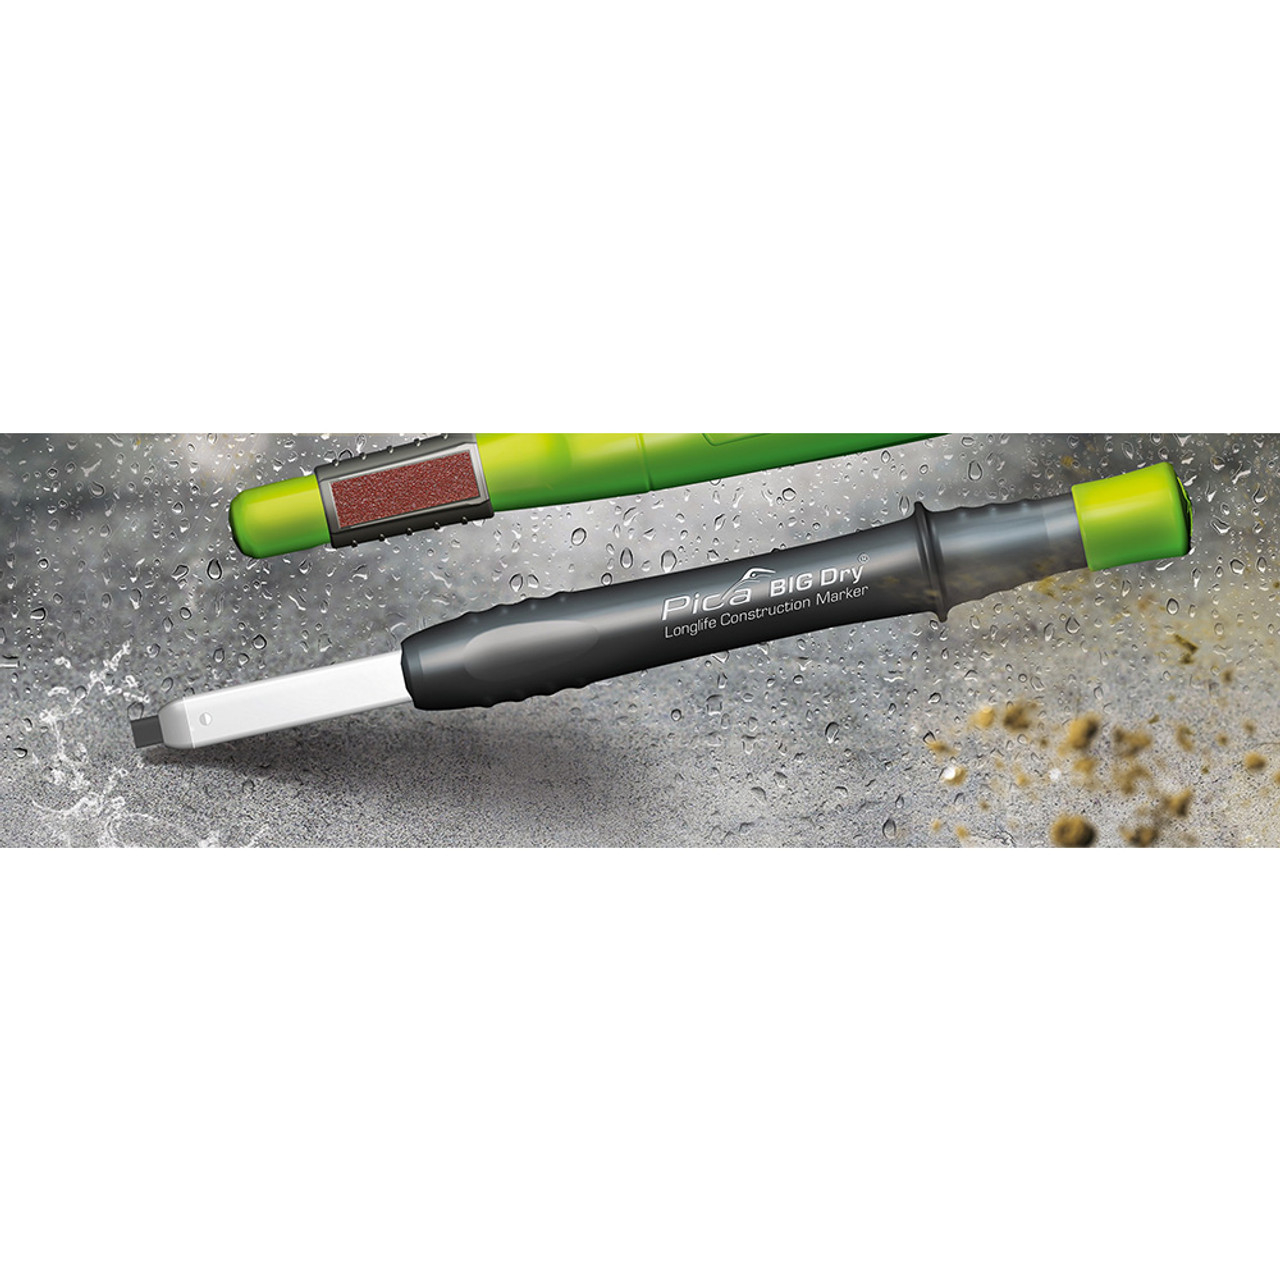 Pica Dry - Professional construction marker for craftsmen - Pica